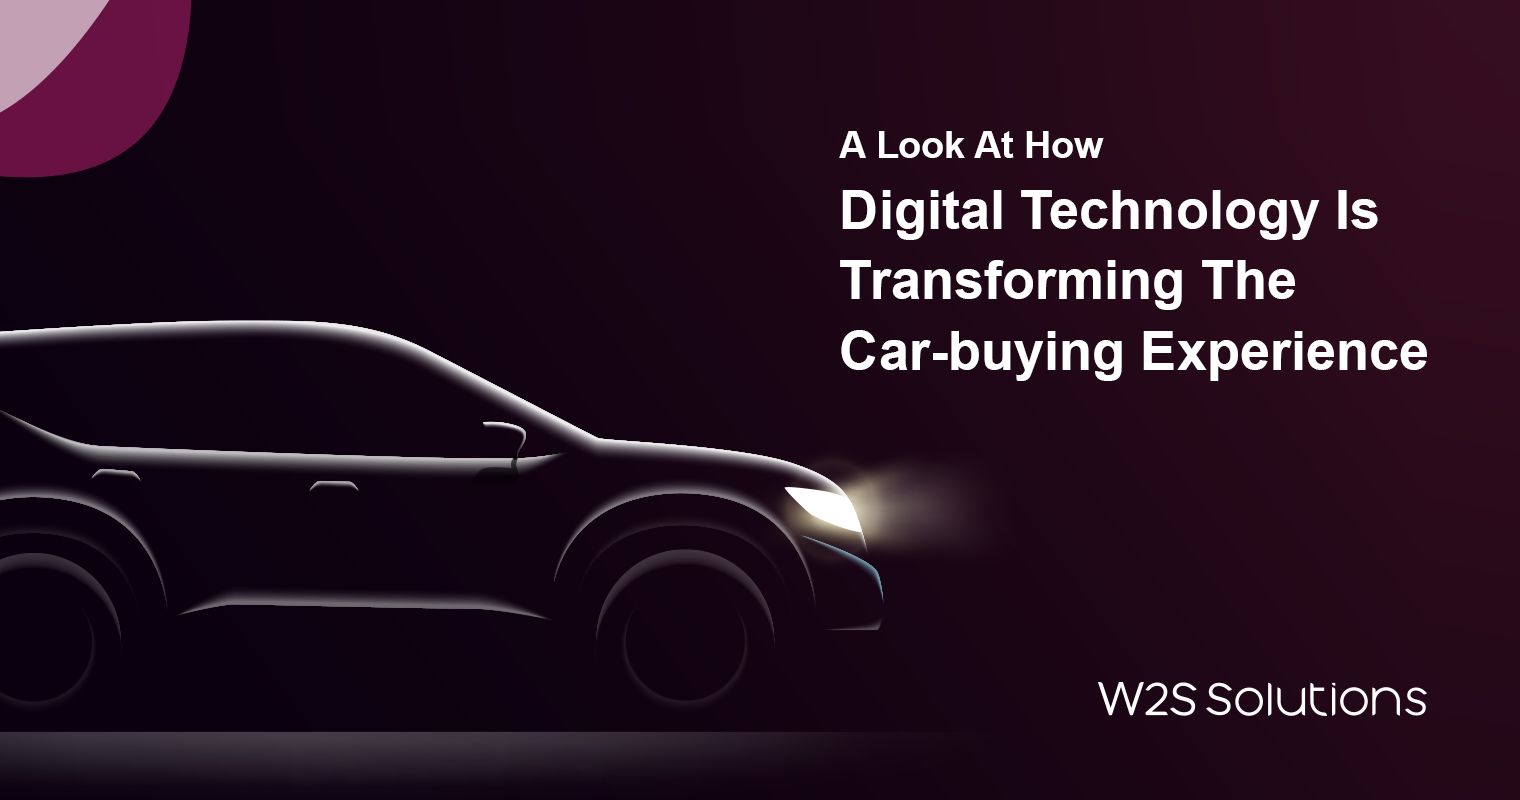 A Look At How Digital Technology Is Transforming The Car-buying Experience